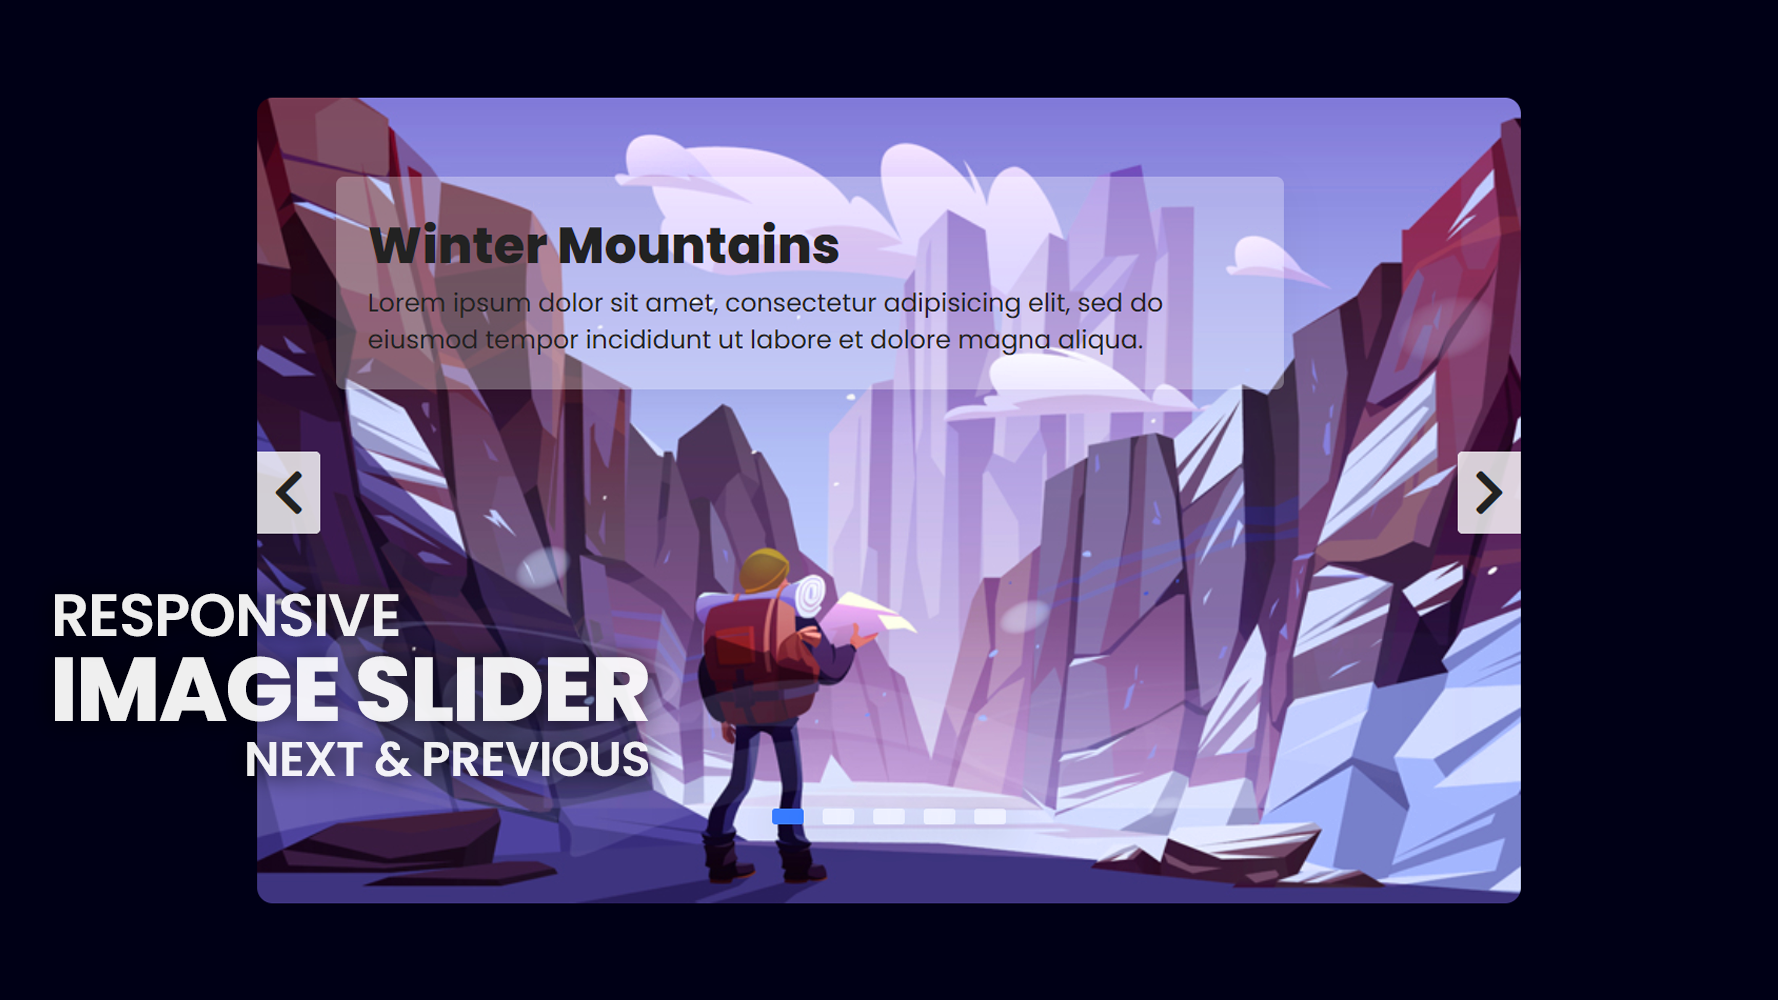 Responsive Image Slider With Next & Previous Buttons | Autoplay - Pause/Play  - HTML CSS & Javascript | Coding Snow | Creative Web Design Tutorials -  Html, Css & Javascript